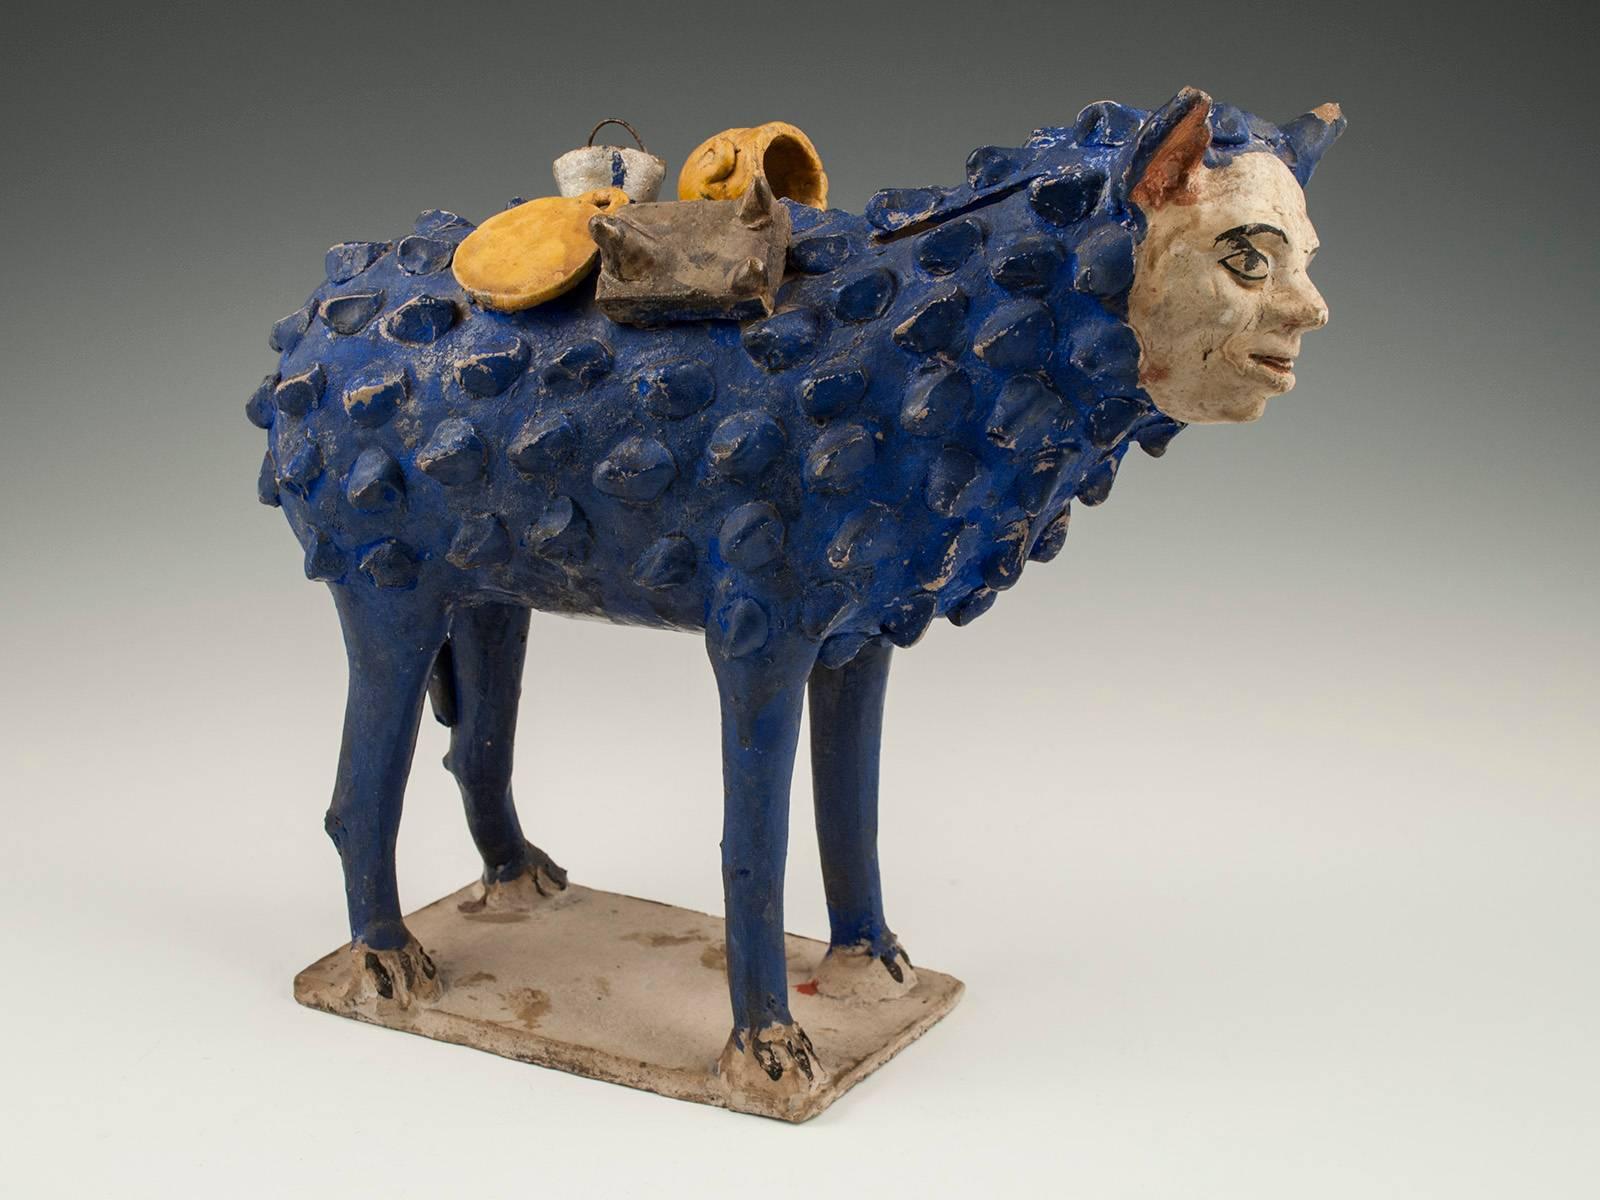 Offered by ZENA KRUZICK
Circa 1950s Ceramic Sheep Nagual Bank, Tlaquepaque, Jalisco, Mexico

This sheep nagual figure was likely made by Julián Acero, an important Mexcian artist who worked in the 1930s-50s, making toys and animal banks. Nagual were